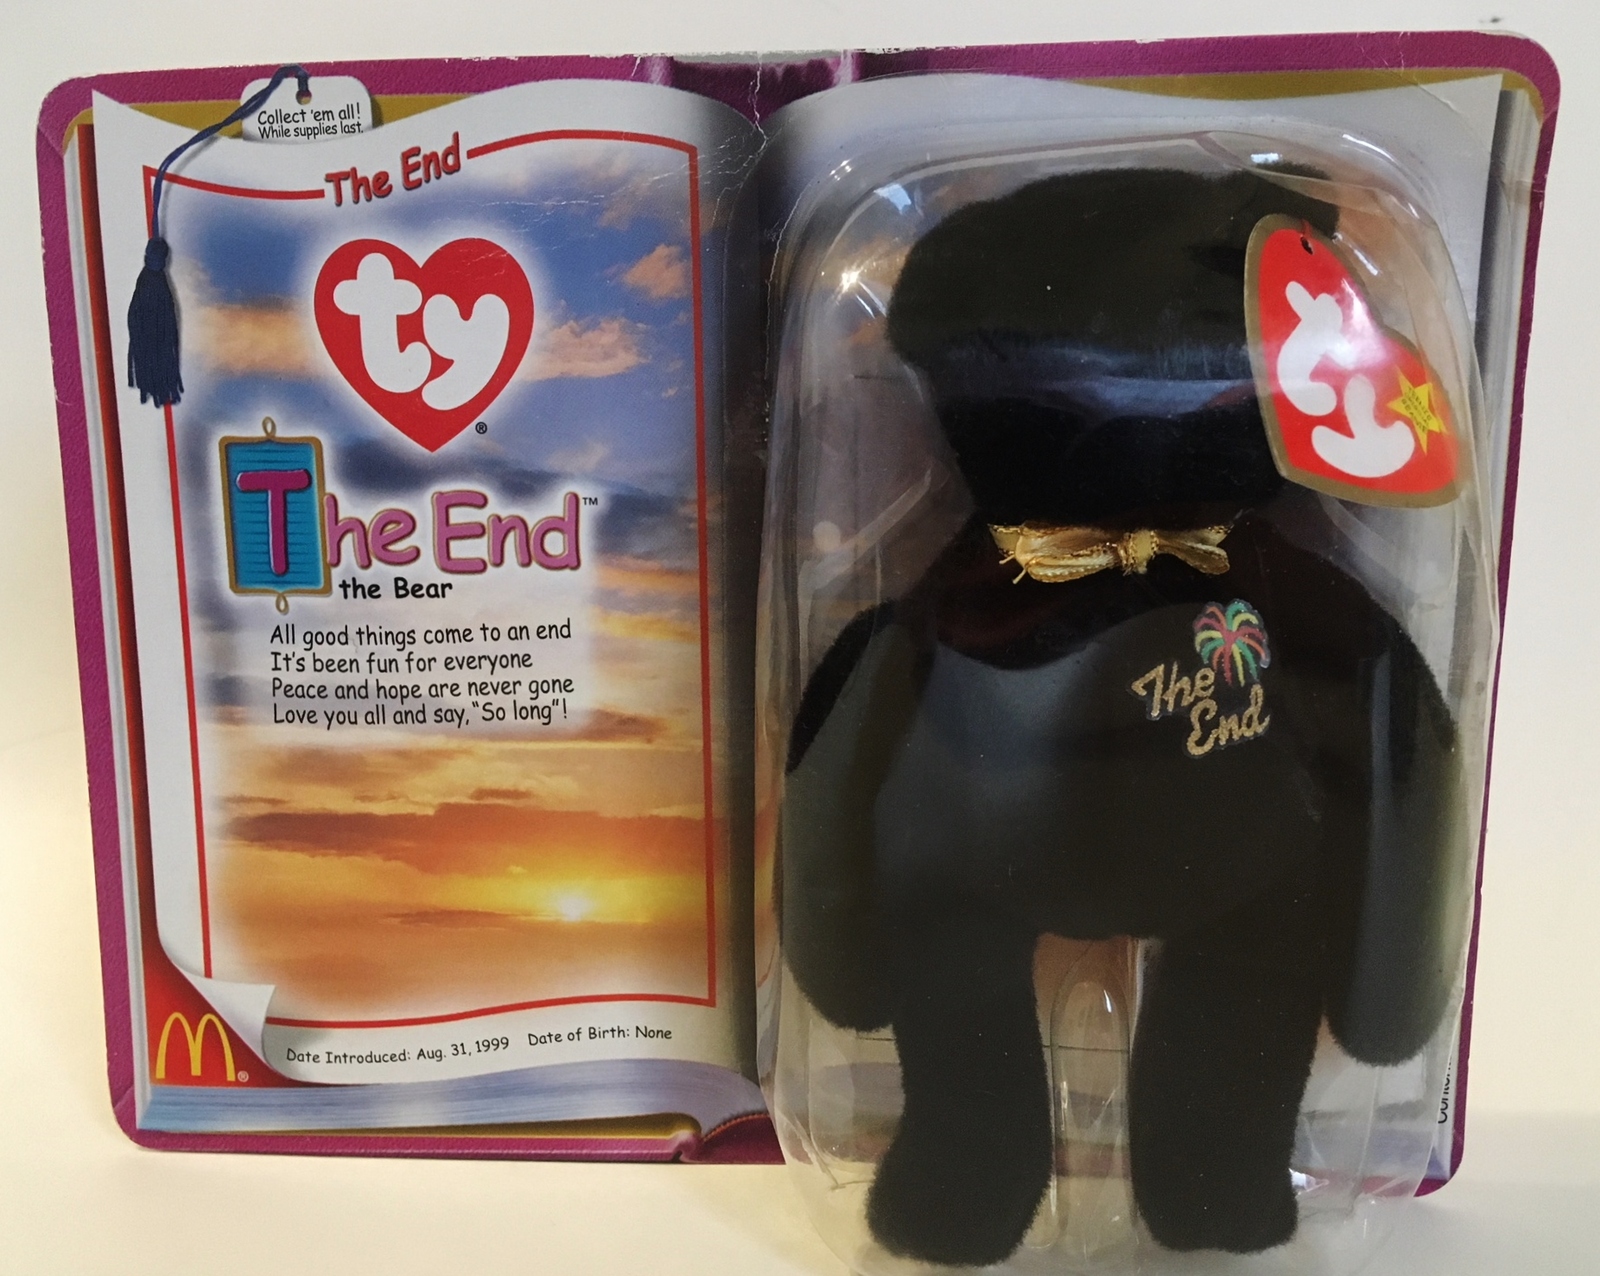 Details about   TY Teenie BEANIE BABIES McDonalds 1999 The End Bear #11 New in box Brand New 